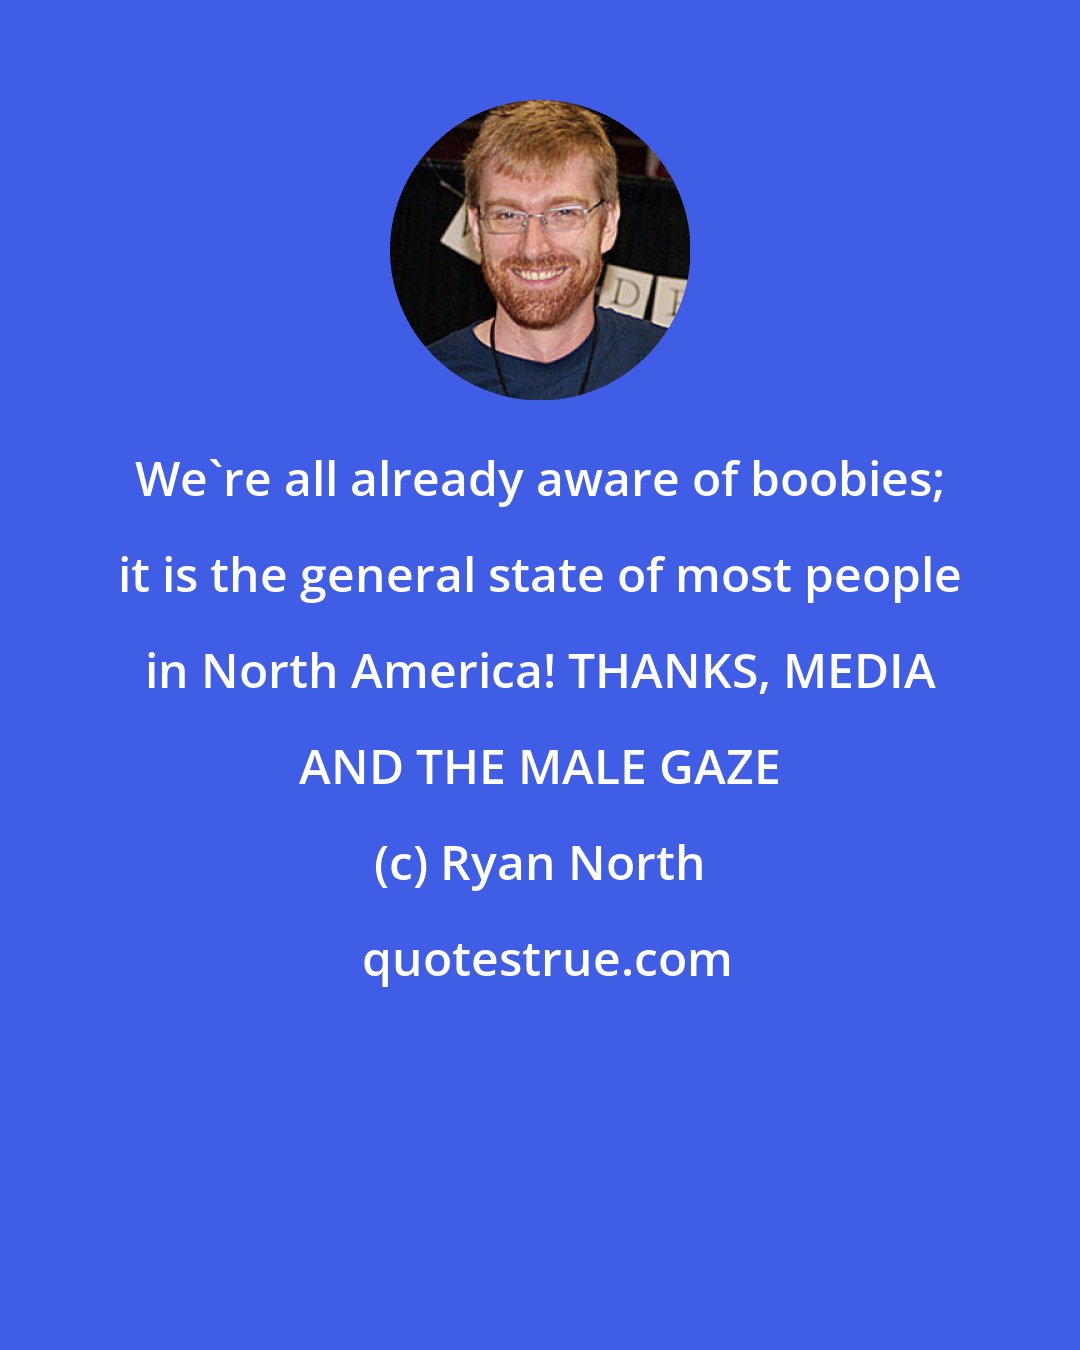 Ryan North: We're all already aware of boobies; it is the general state of most people in North America! THANKS, MEDIA AND THE MALE GAZE